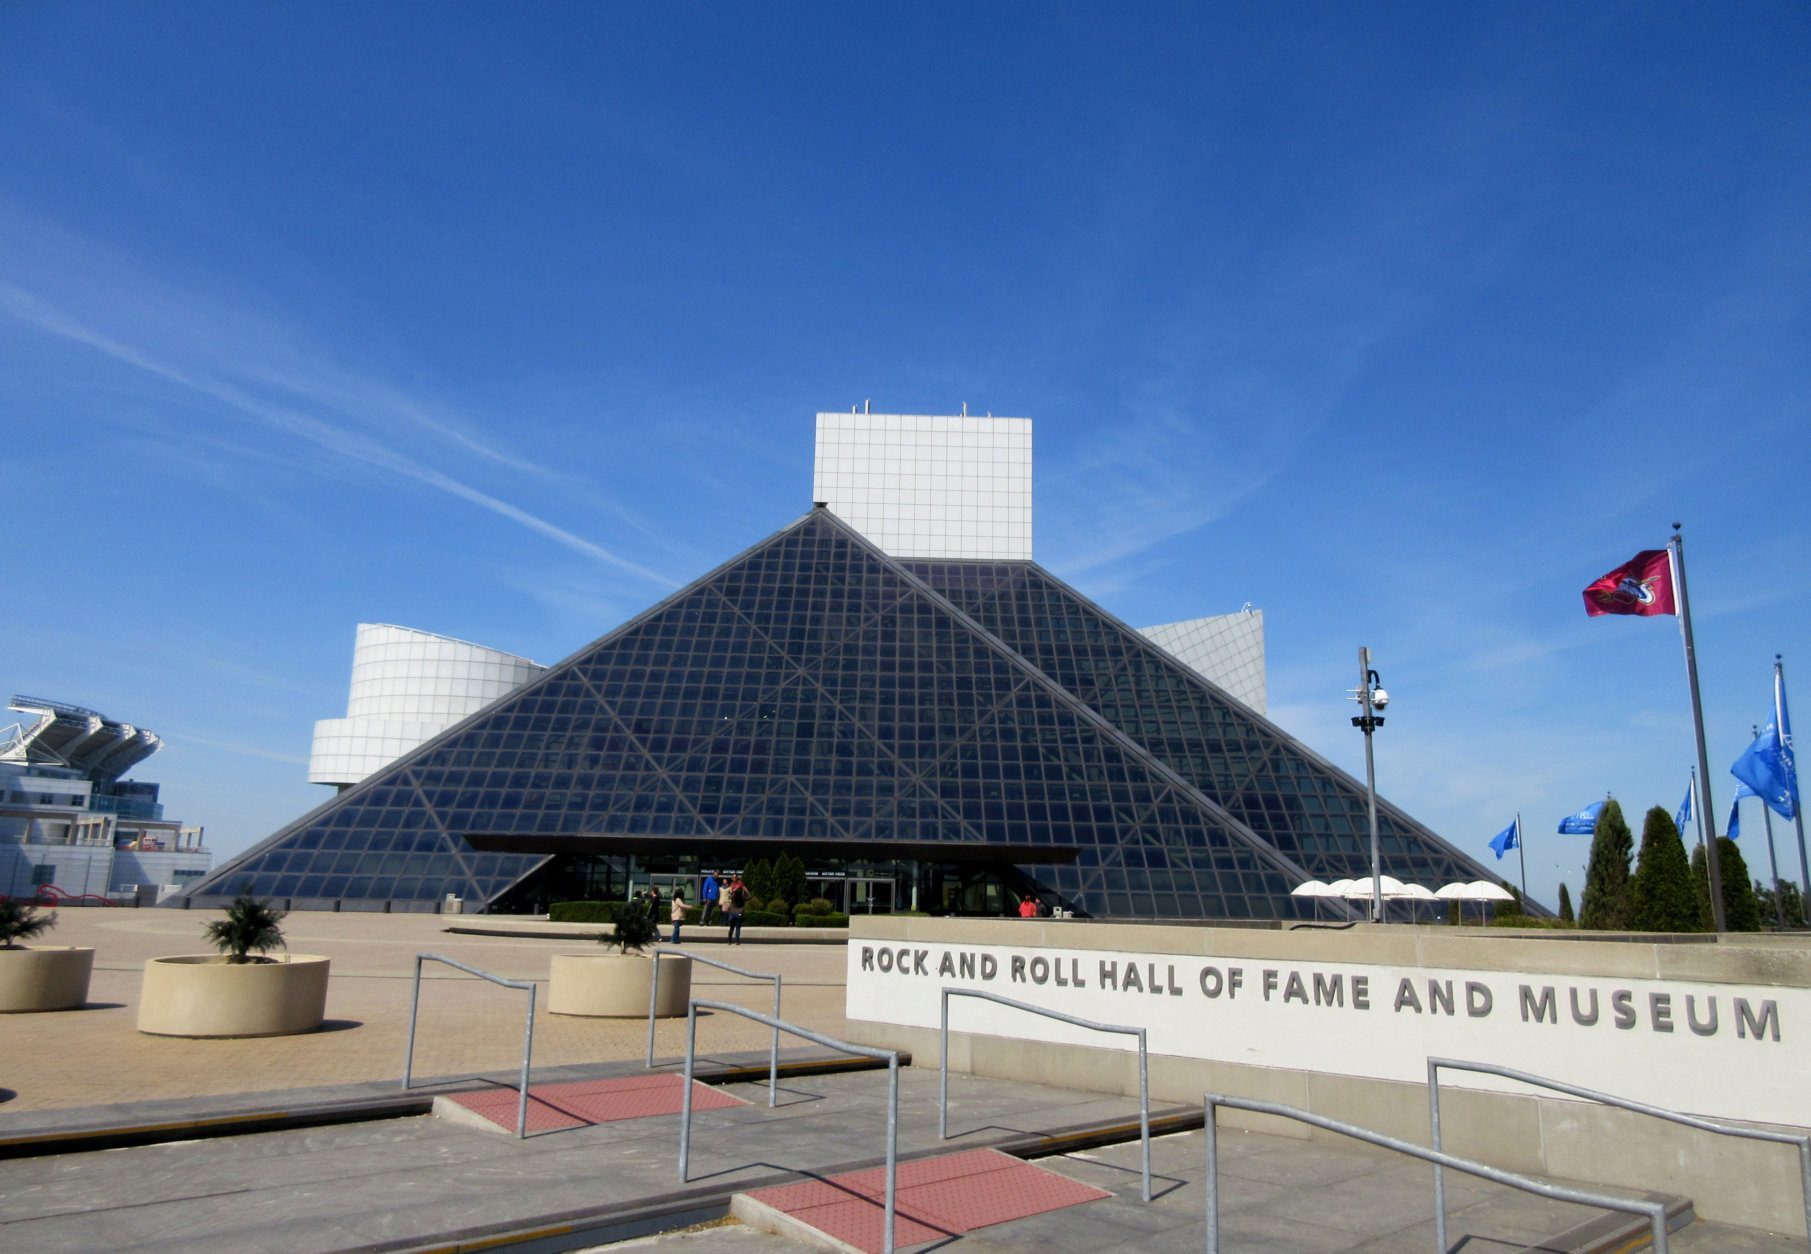 FILE – This April 24, 2016, file photo shows the Rock and Roll Hall of Fame and Museum, located on the shores of Lake Erie in downtown Cleveland. Architect I.M. Pei designed the museum's futuristic building. Cleveland is hosting the Republican National Convention from Monday through Thursday, July 18 to 21, 2016. (AP Photo/Beth J. Harpaz, File)